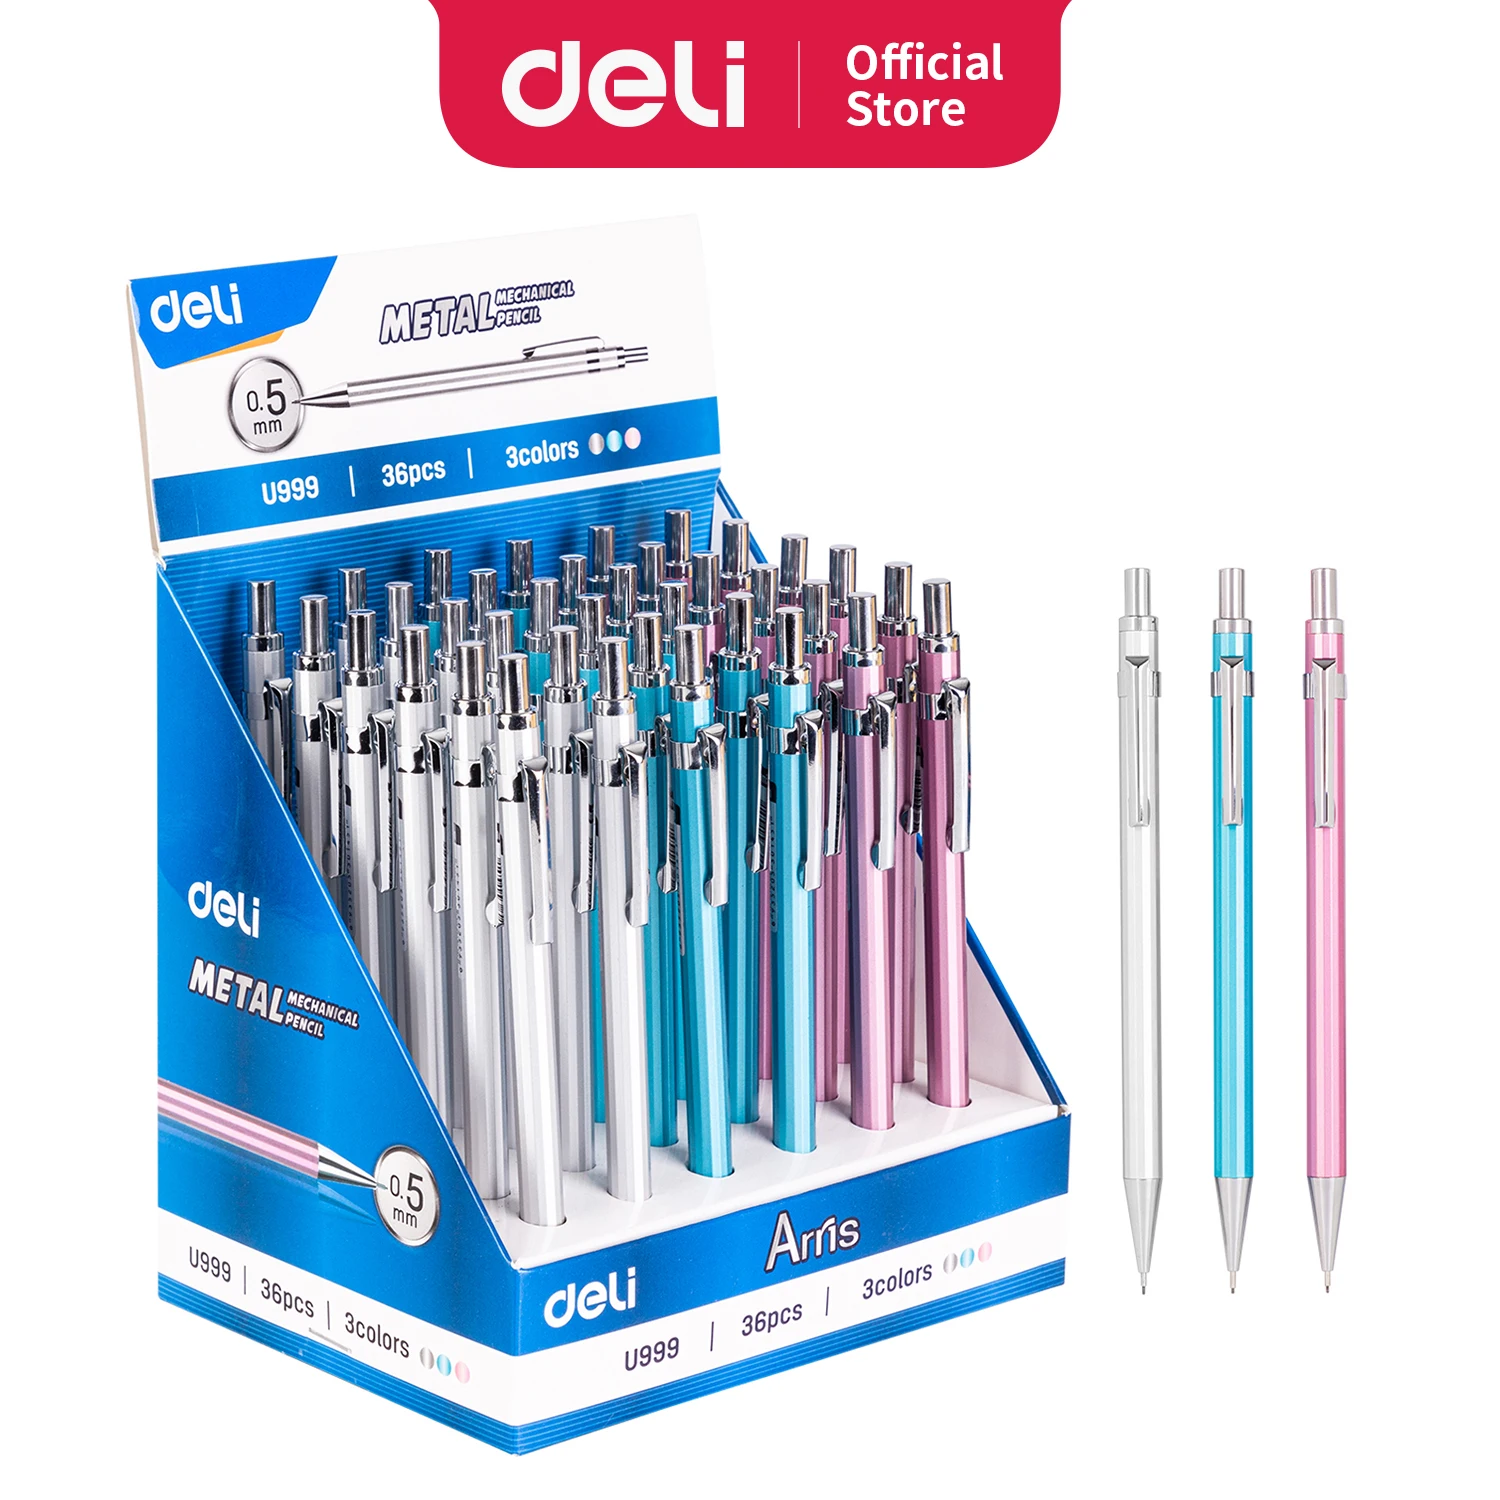 Deli Metal Mechanical Pencil 0.5mm 0.7mm with Lead Retractable Black Lead Pencils Stationery School Supplies Art Sketch Writing metal mechanical pencil set art 2b hb color lead refills with pencil sharpener erasers drawing for writing sketching artist